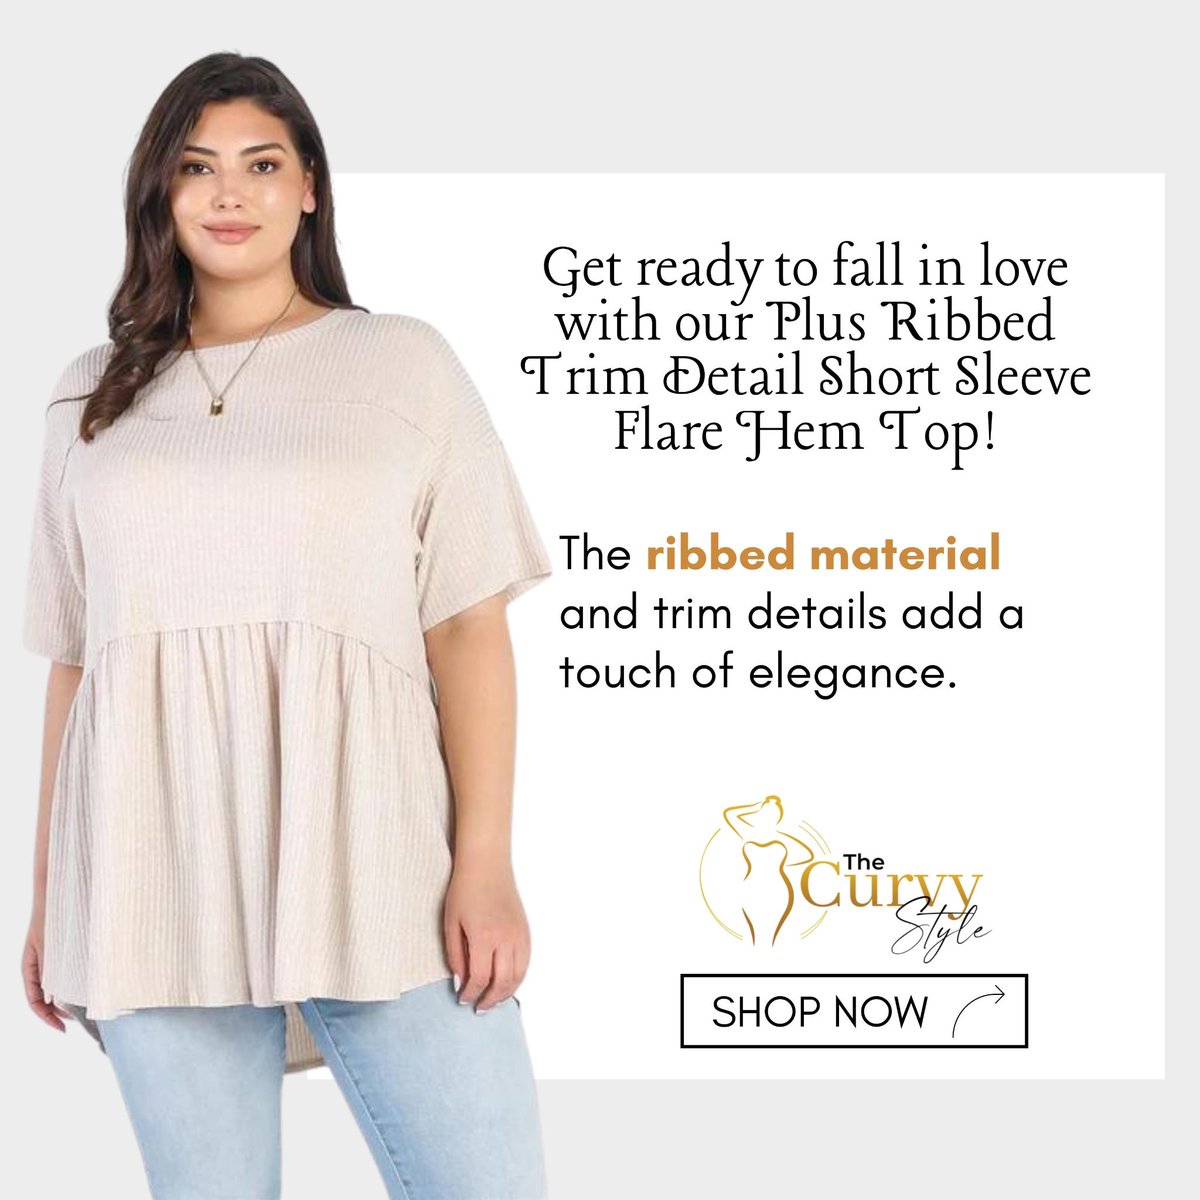 ✨🌸 The ribbed material and trim details add a touch of elegance, while the relaxed fit and flare hem provide comfort and style. Perfect for a casual and trendy lifestyle! . 👉 thecurvystyle.com . #FlareHemTop #RibbedDetail #TrendyFashion